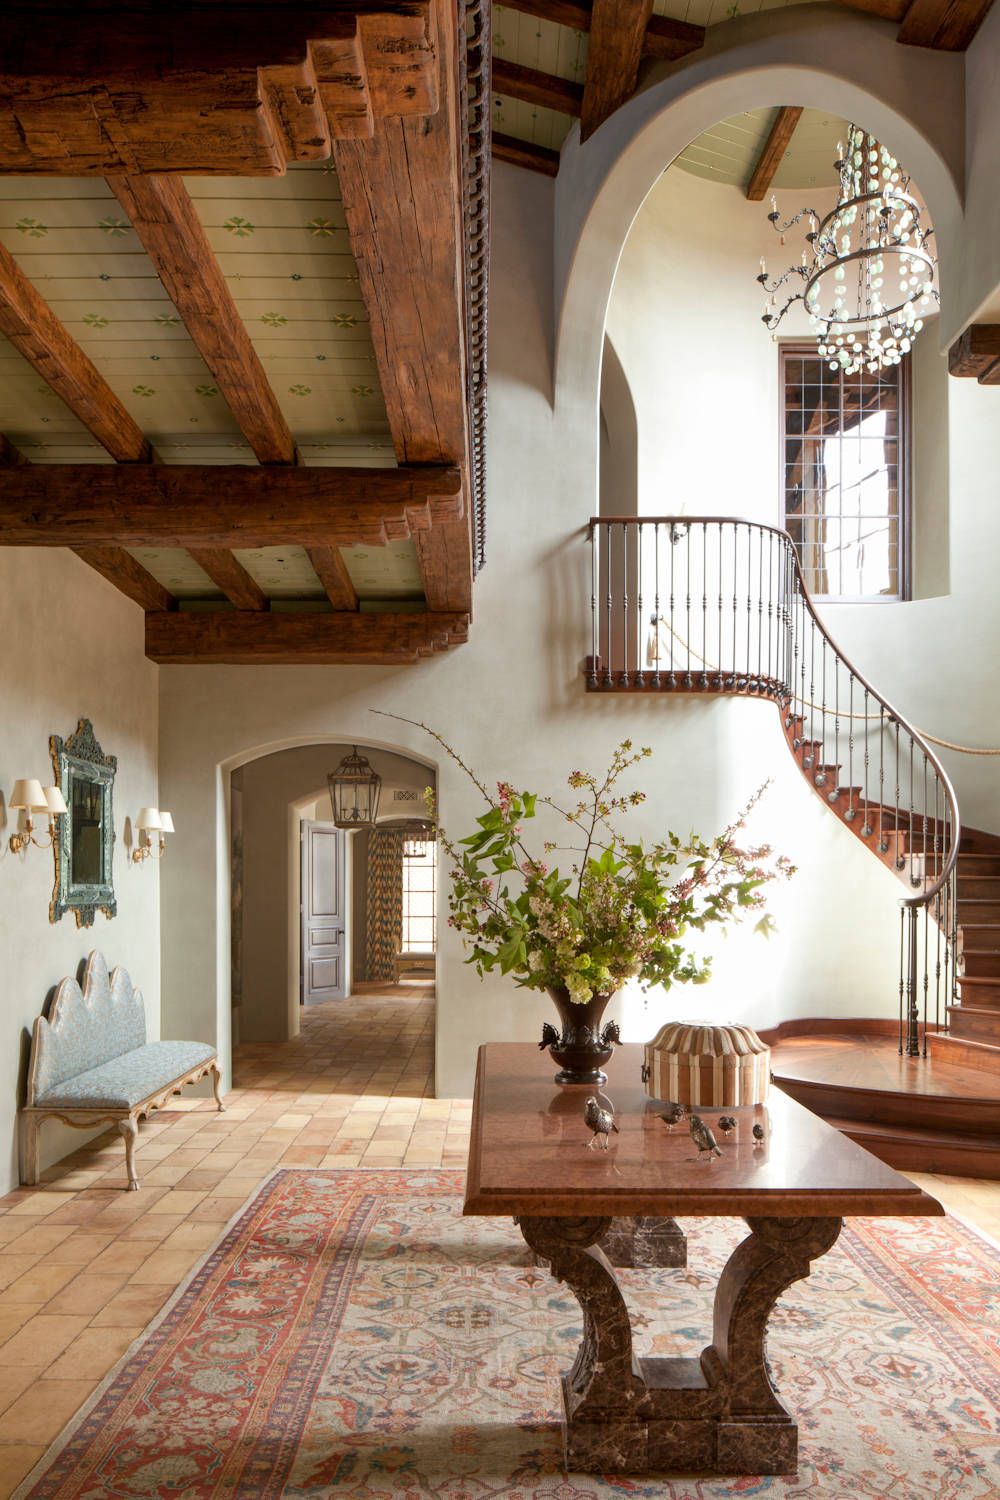 Tuscan-charm-and-warm-color-scheme-combined-to-create-the-perfect-Mediterranea-style-entry-43099